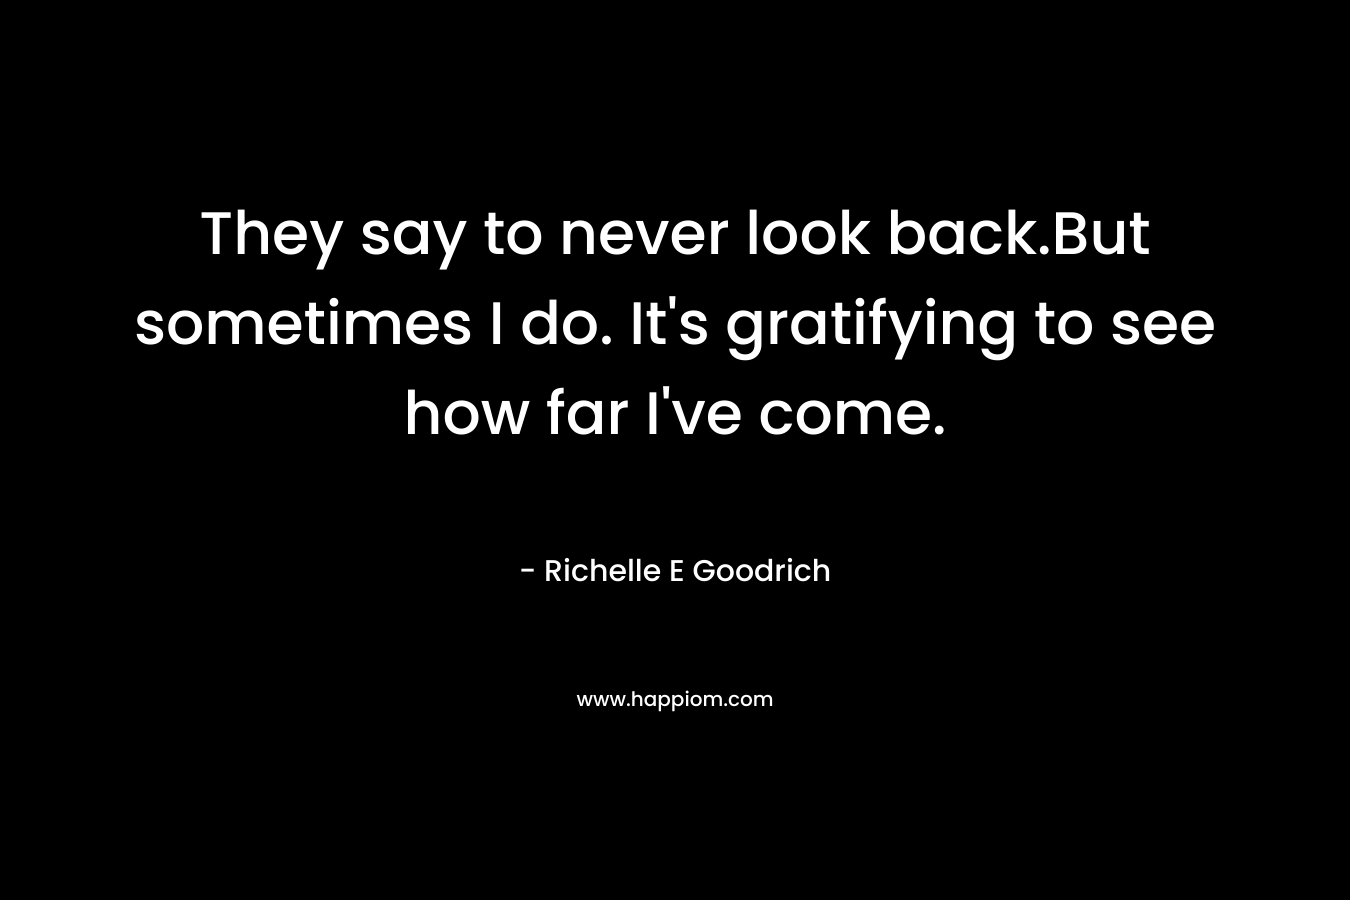 They say to never look back.But sometimes I do. It’s gratifying to see how far I’ve come. – Richelle E Goodrich